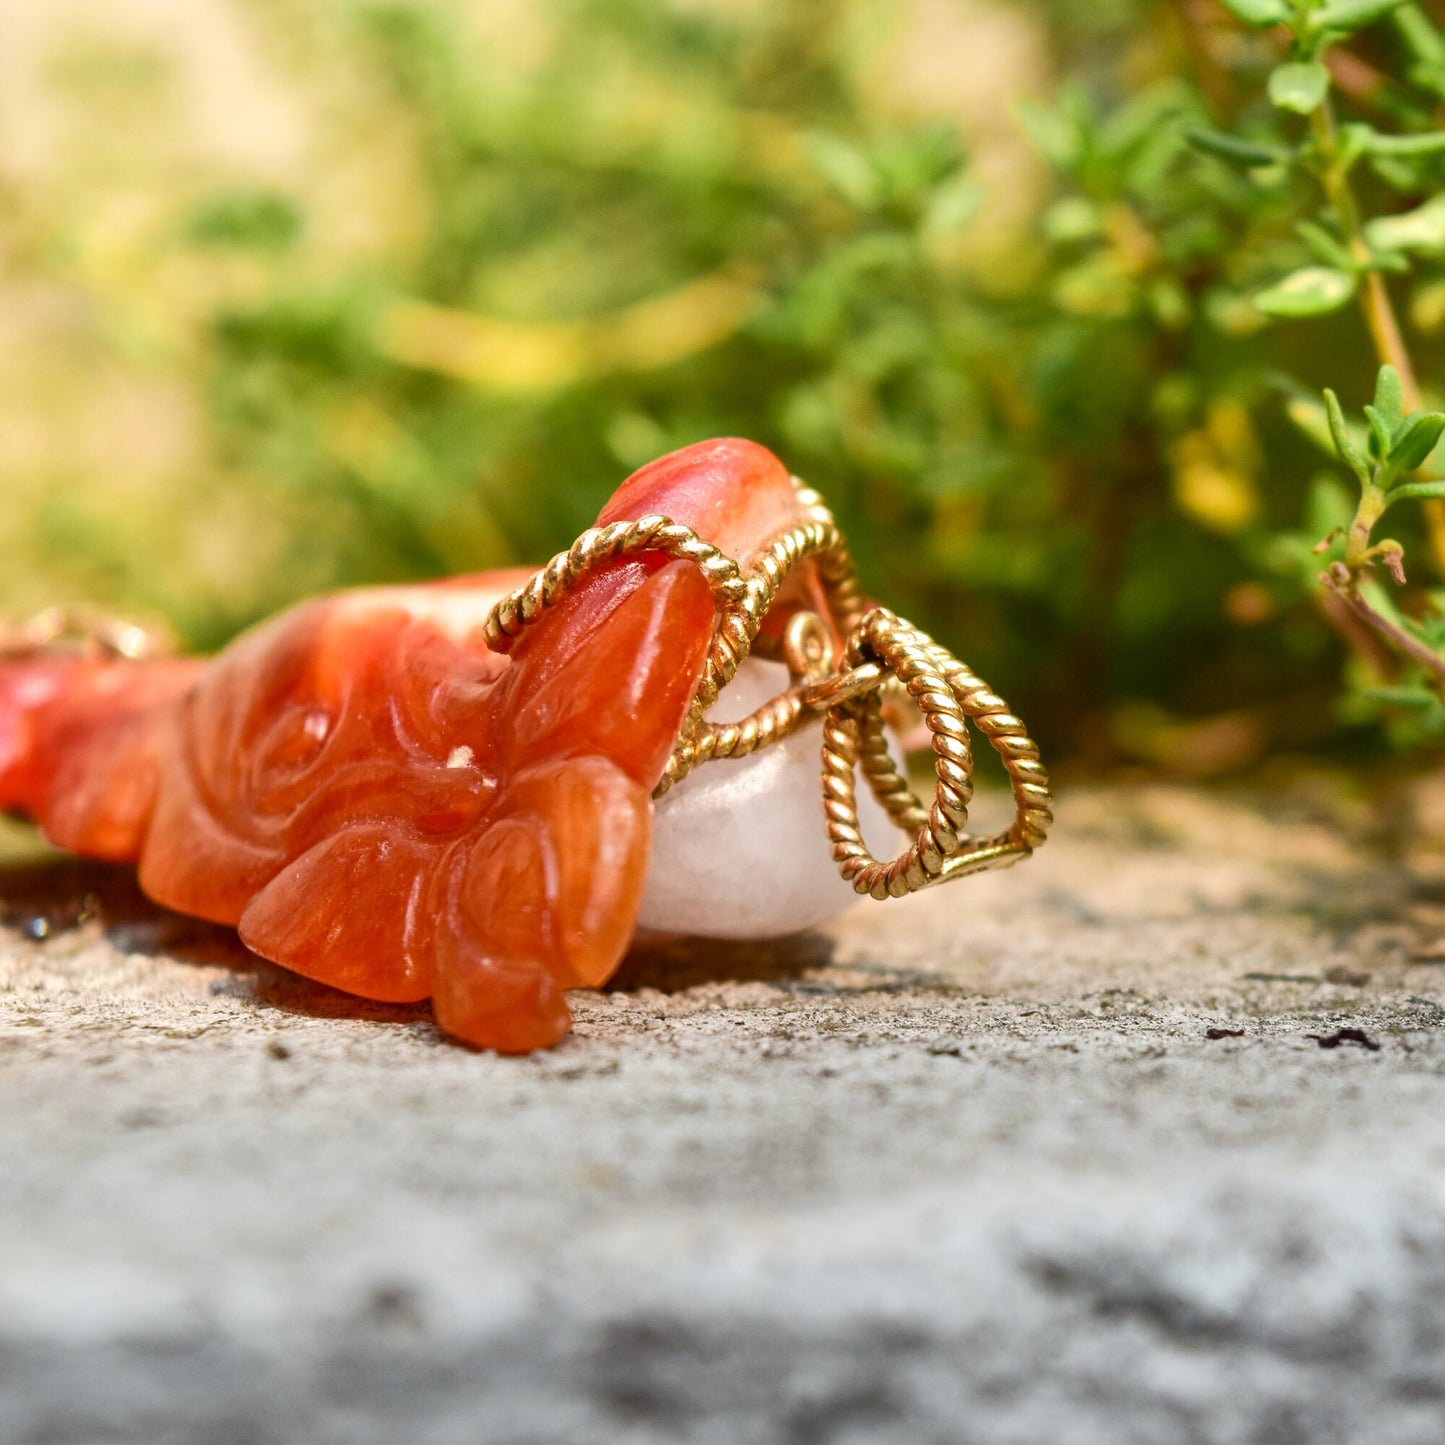 Carved red jade pendant featuring a Buddha figure wrapped in 14K yellow gold wire, set against a natural green background.